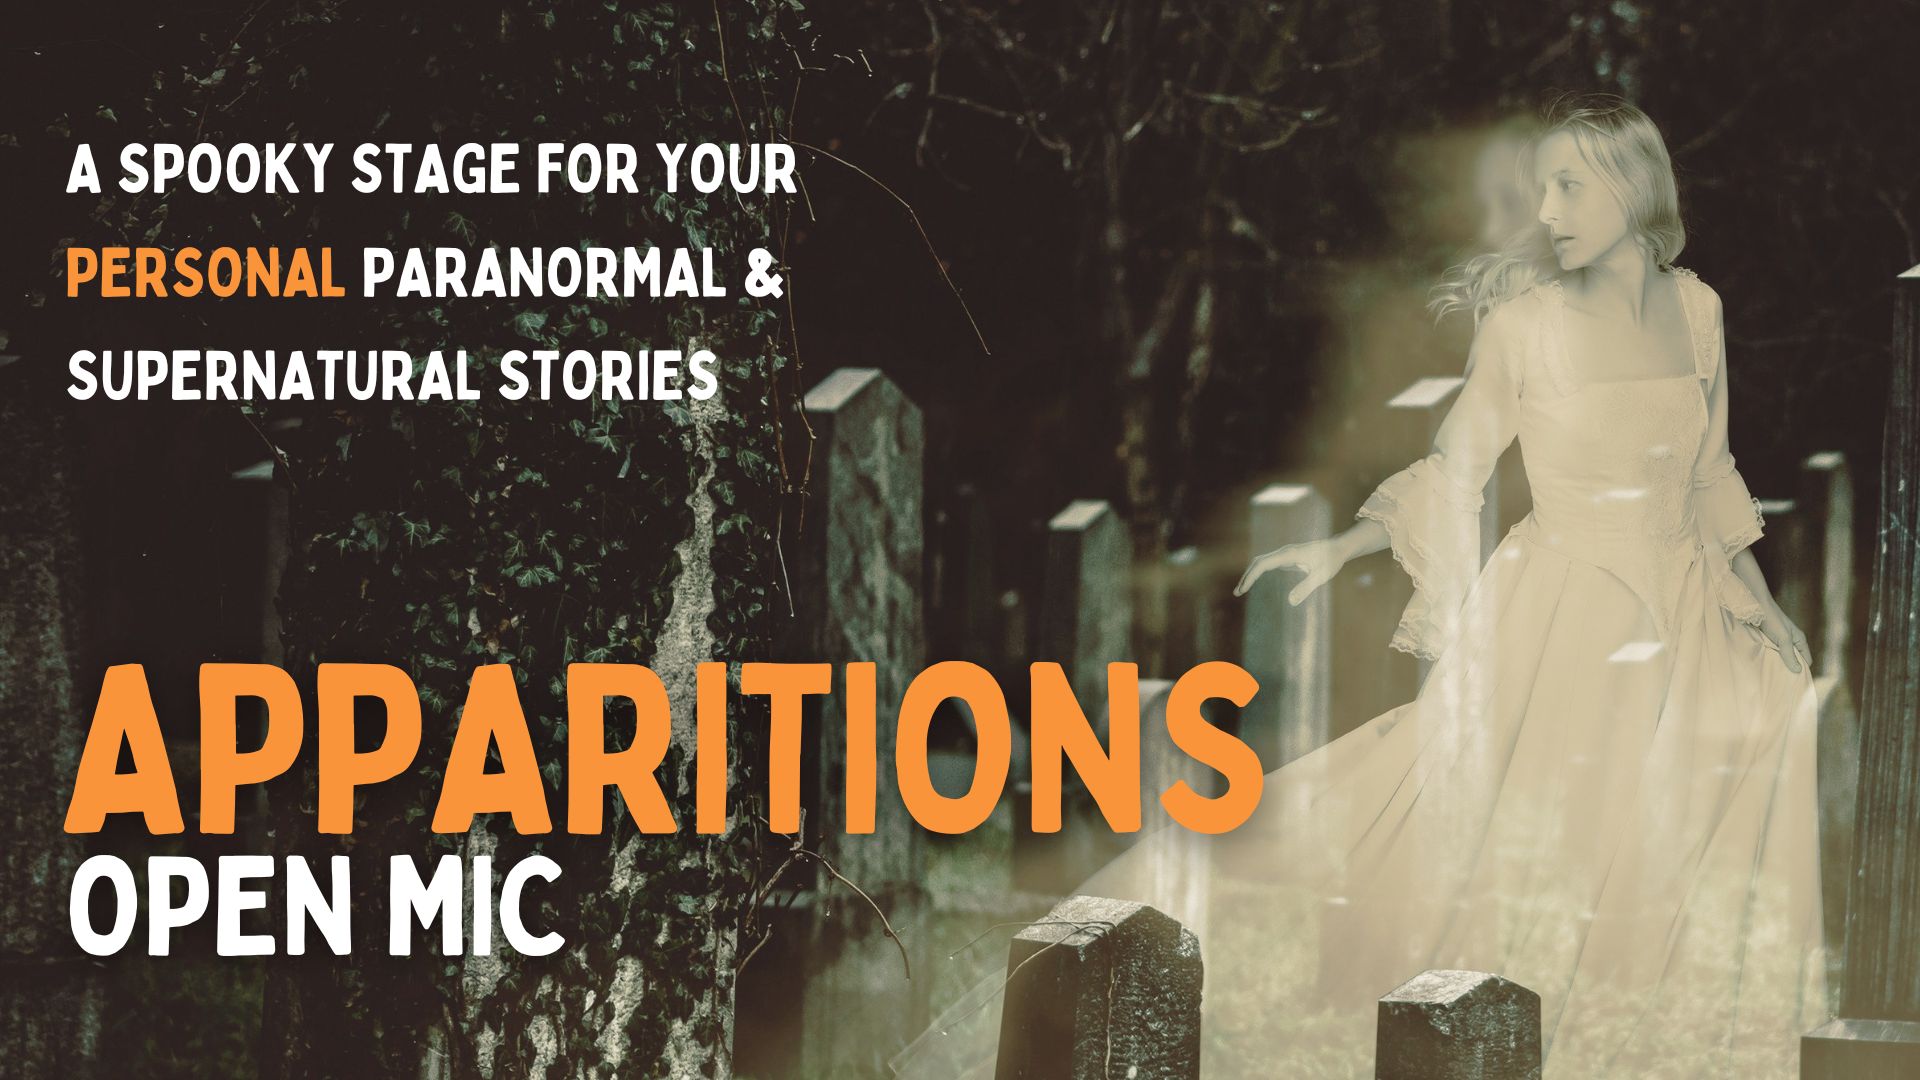  Apparitions Open Mic: A Spooky Stage for Your Personal Paranormal & Supernatural Stories